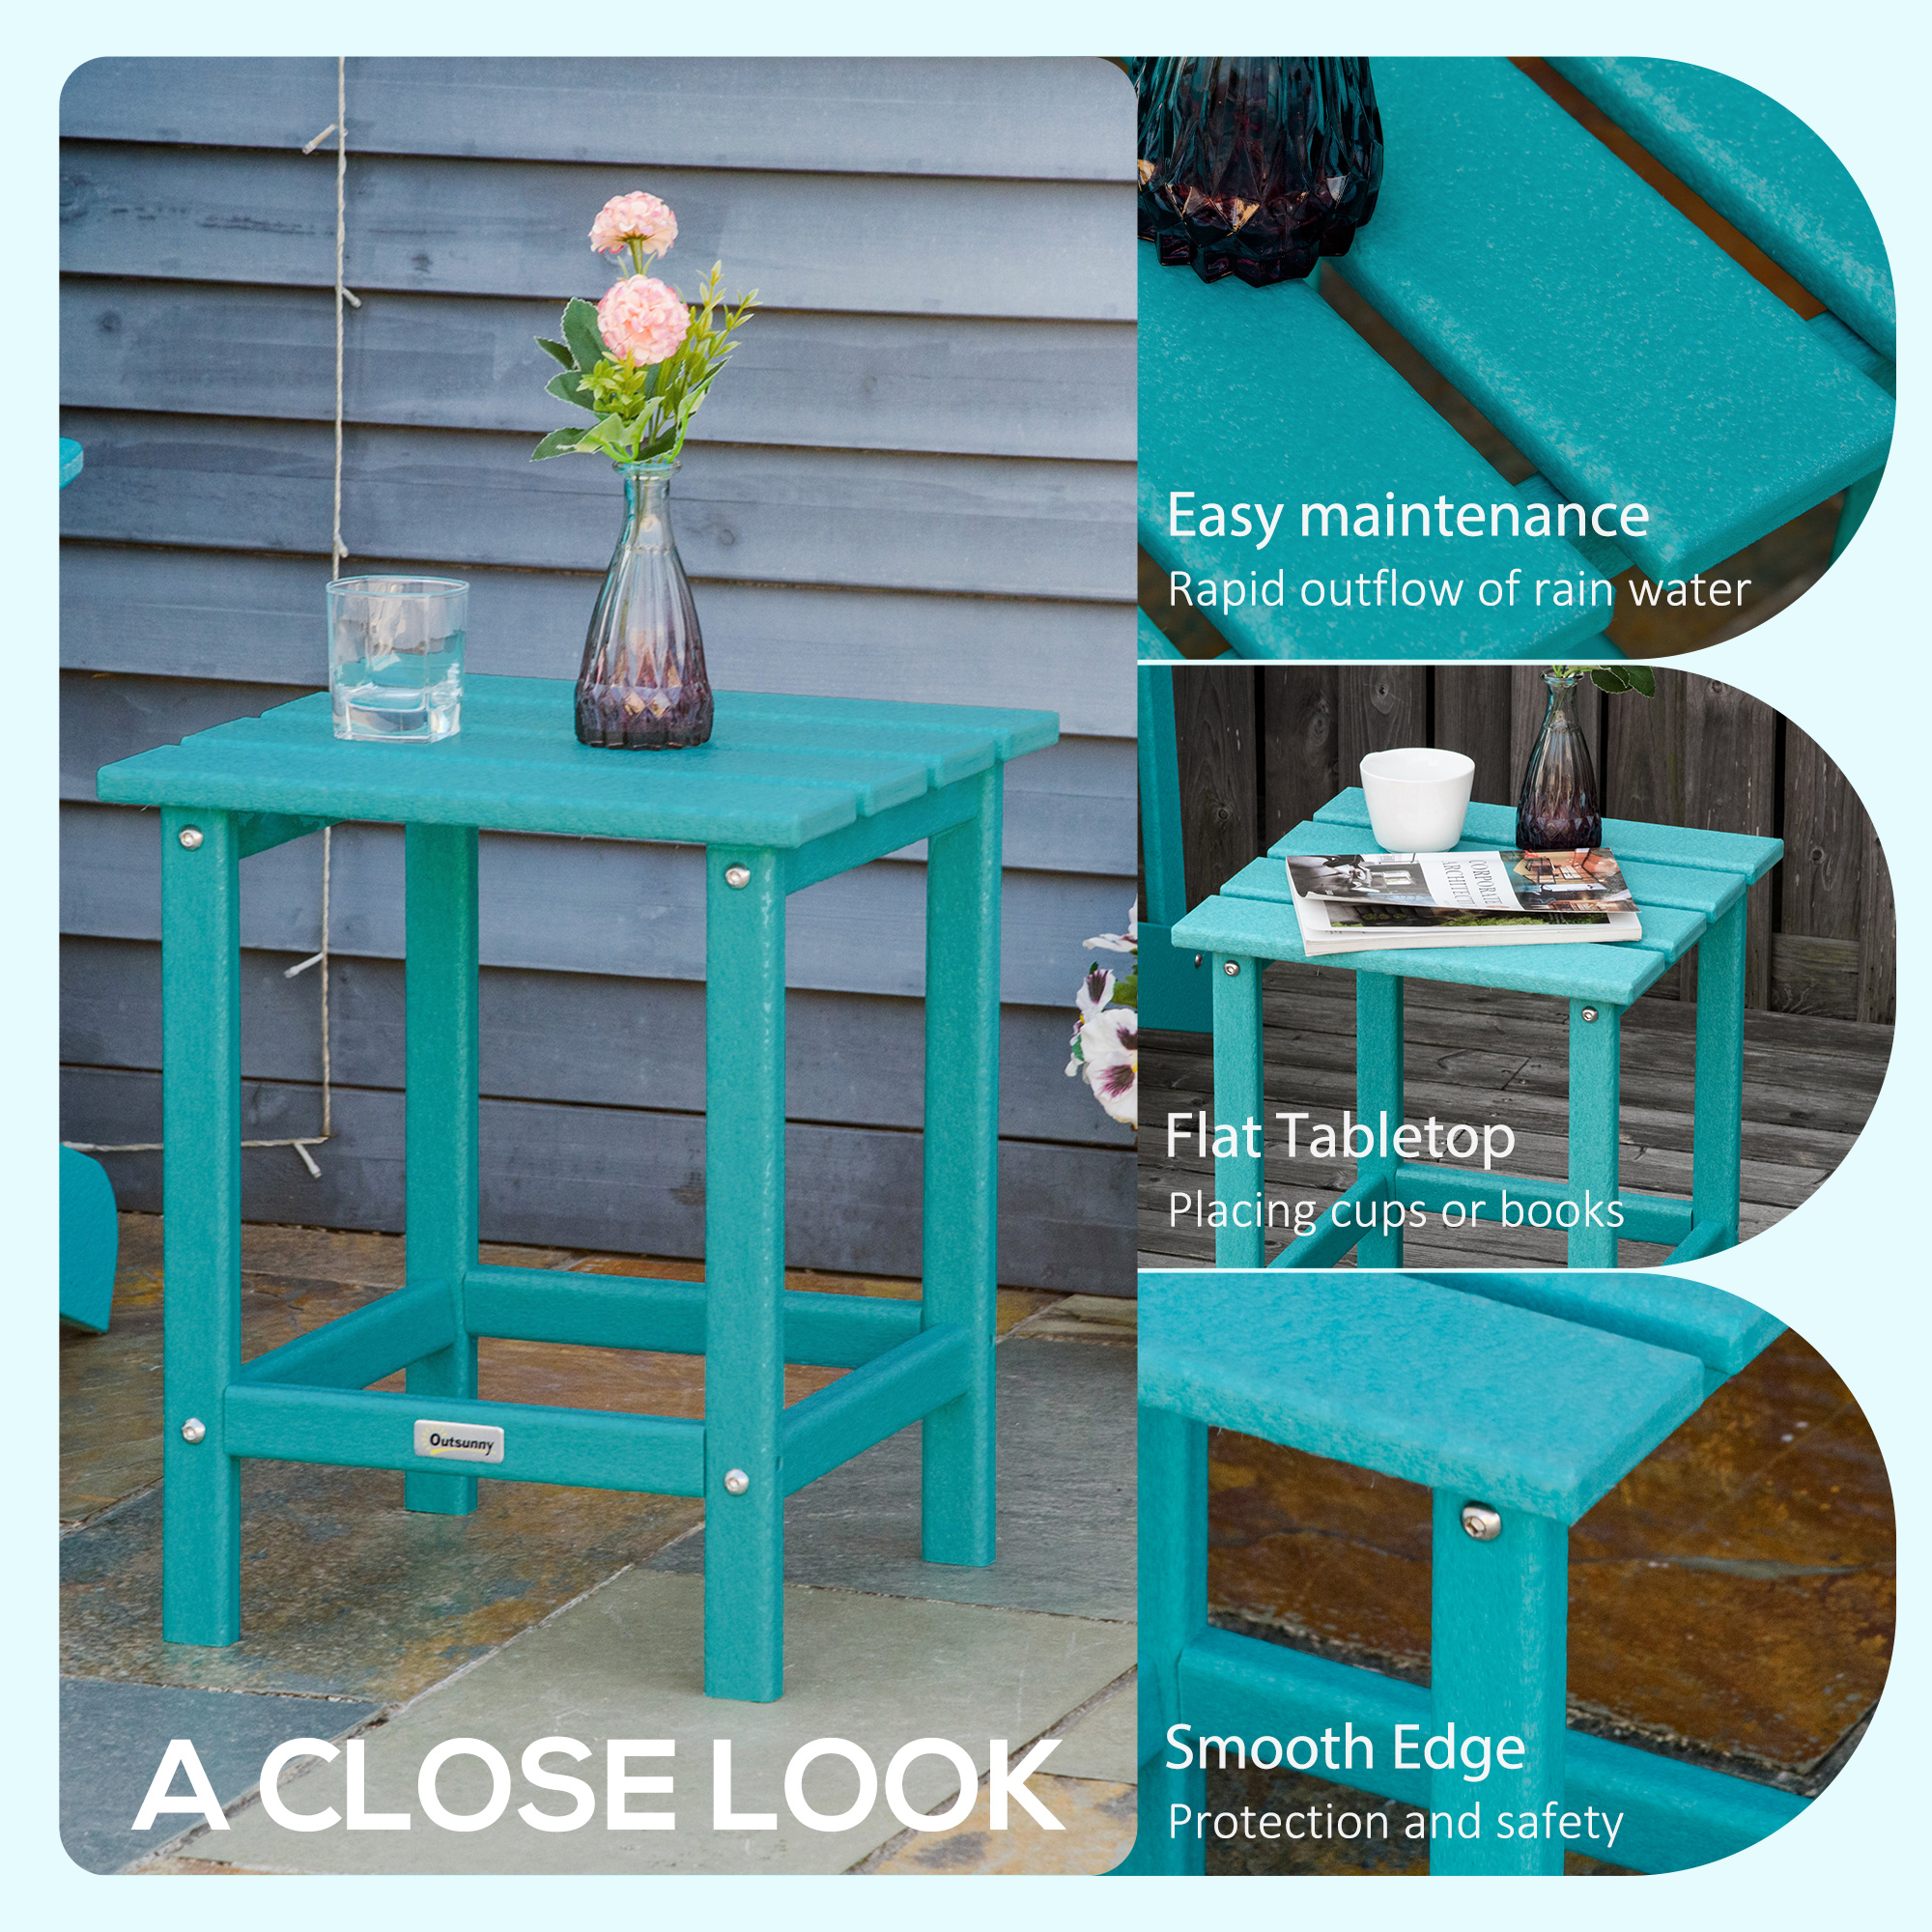 Outsunny 15" Patio End Table, HDPE Plastic, Turquoise - image 5 of 9